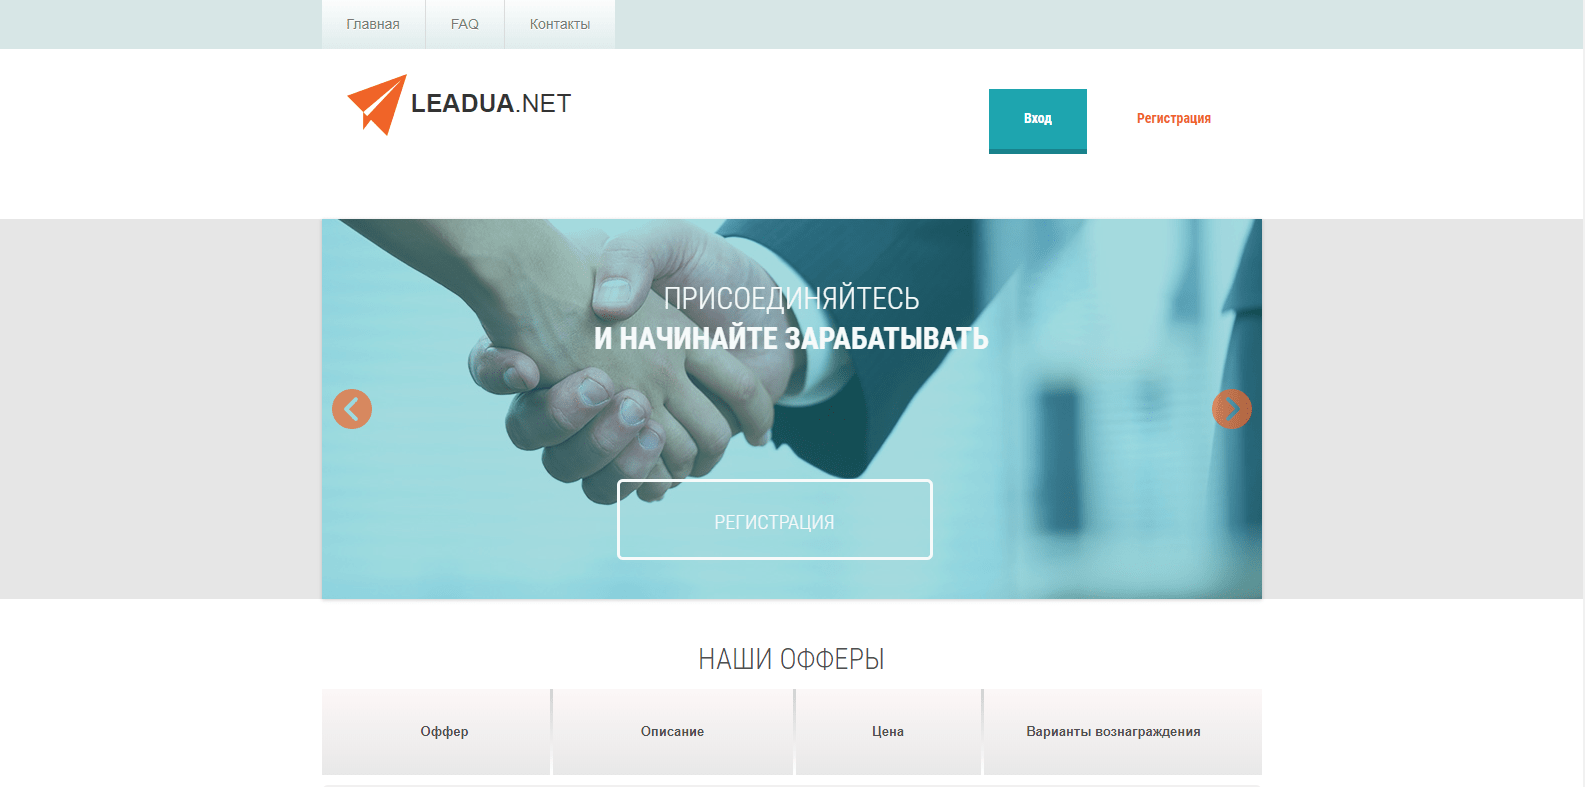 An example of our client's Affiliate Program Design